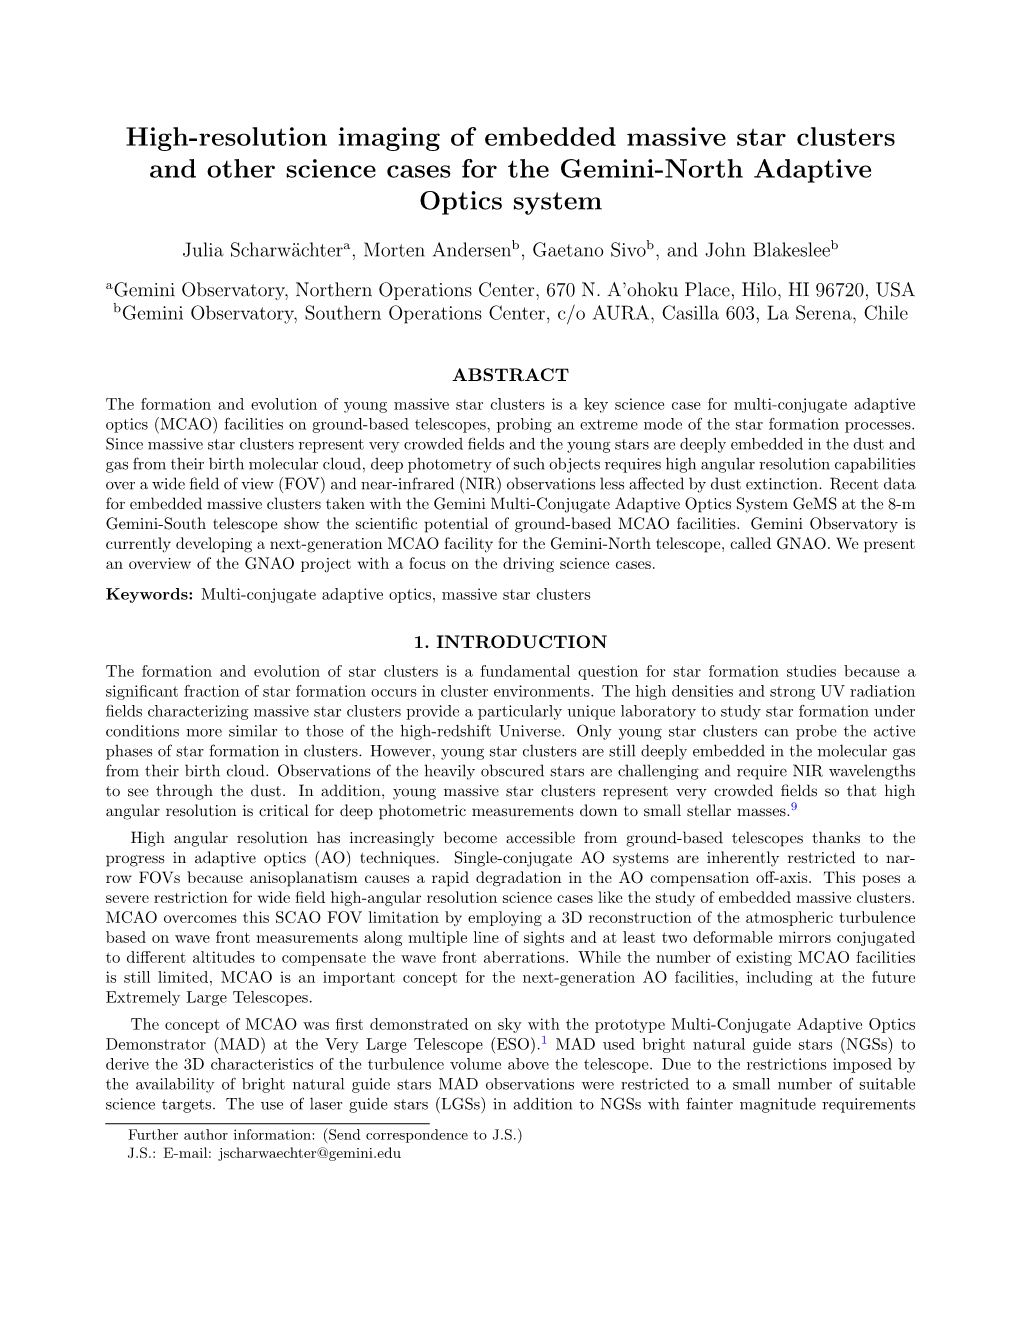 High-Resolution Imaging of Embedded Massive Star Clusters and Other Science Cases for the Gemini-North Adaptive Optics System